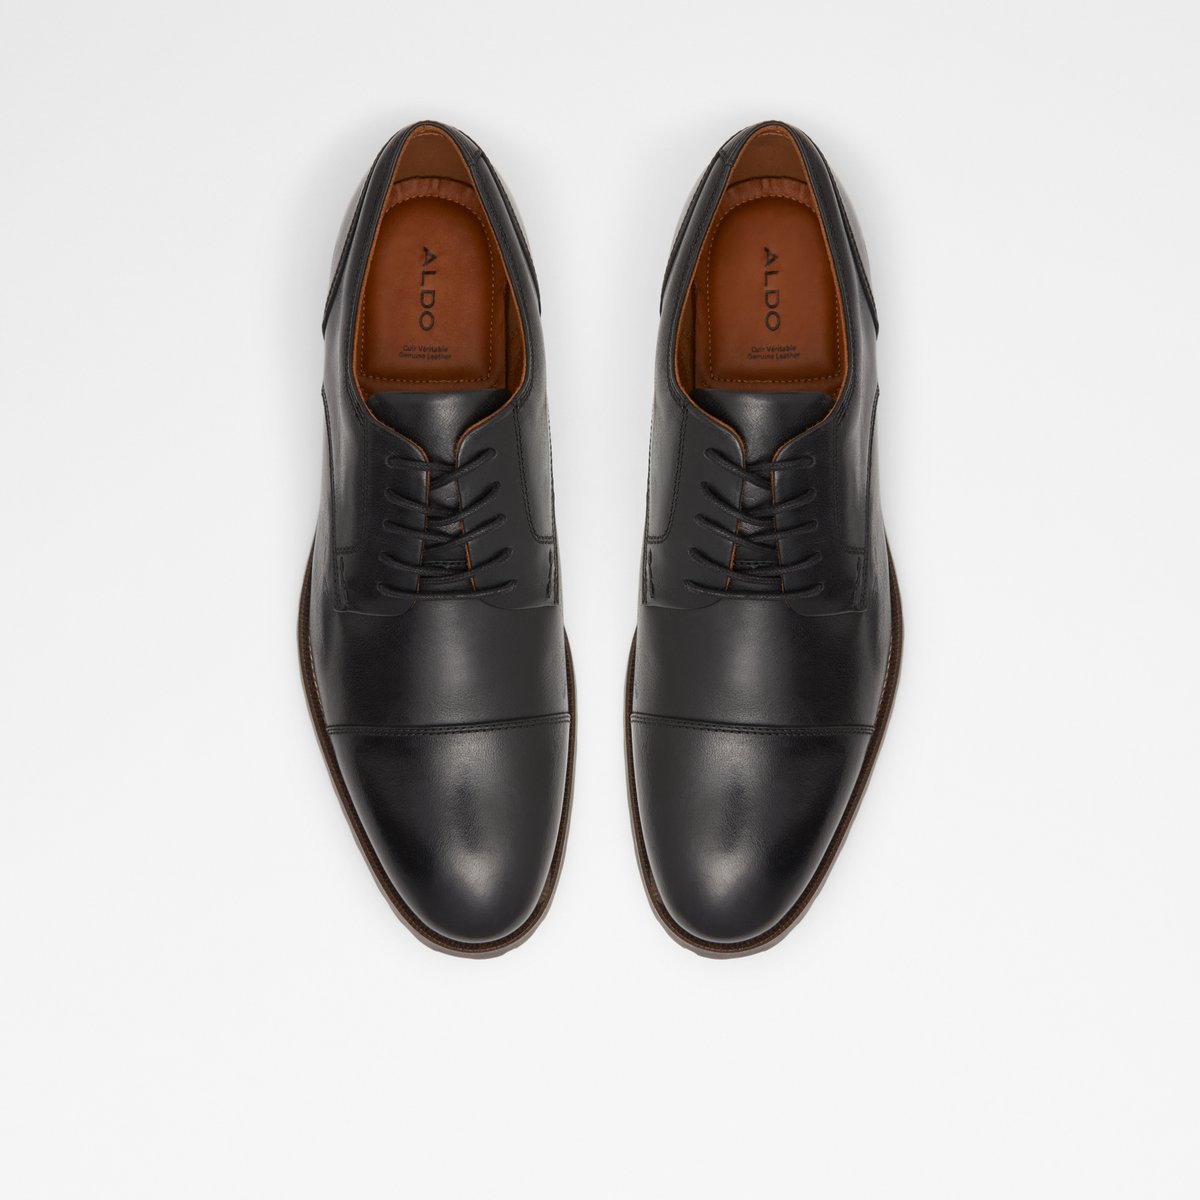 Opaque Laziness fabric Wilbert Black Leather Smooth Men's Oxfords & Lace-ups | ALDO US